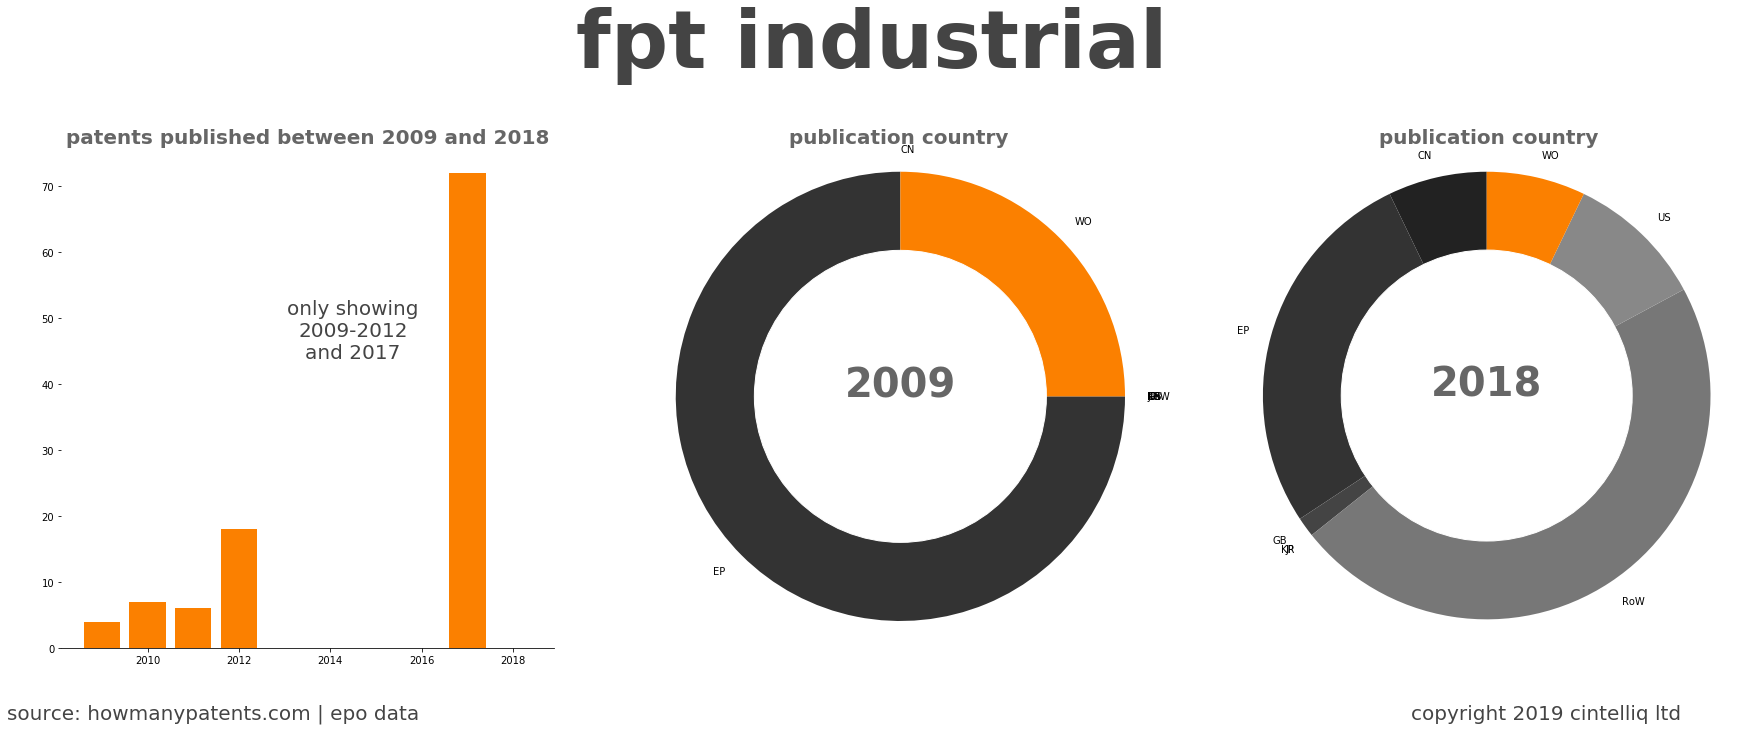 summary of patents for Fpt Industrial